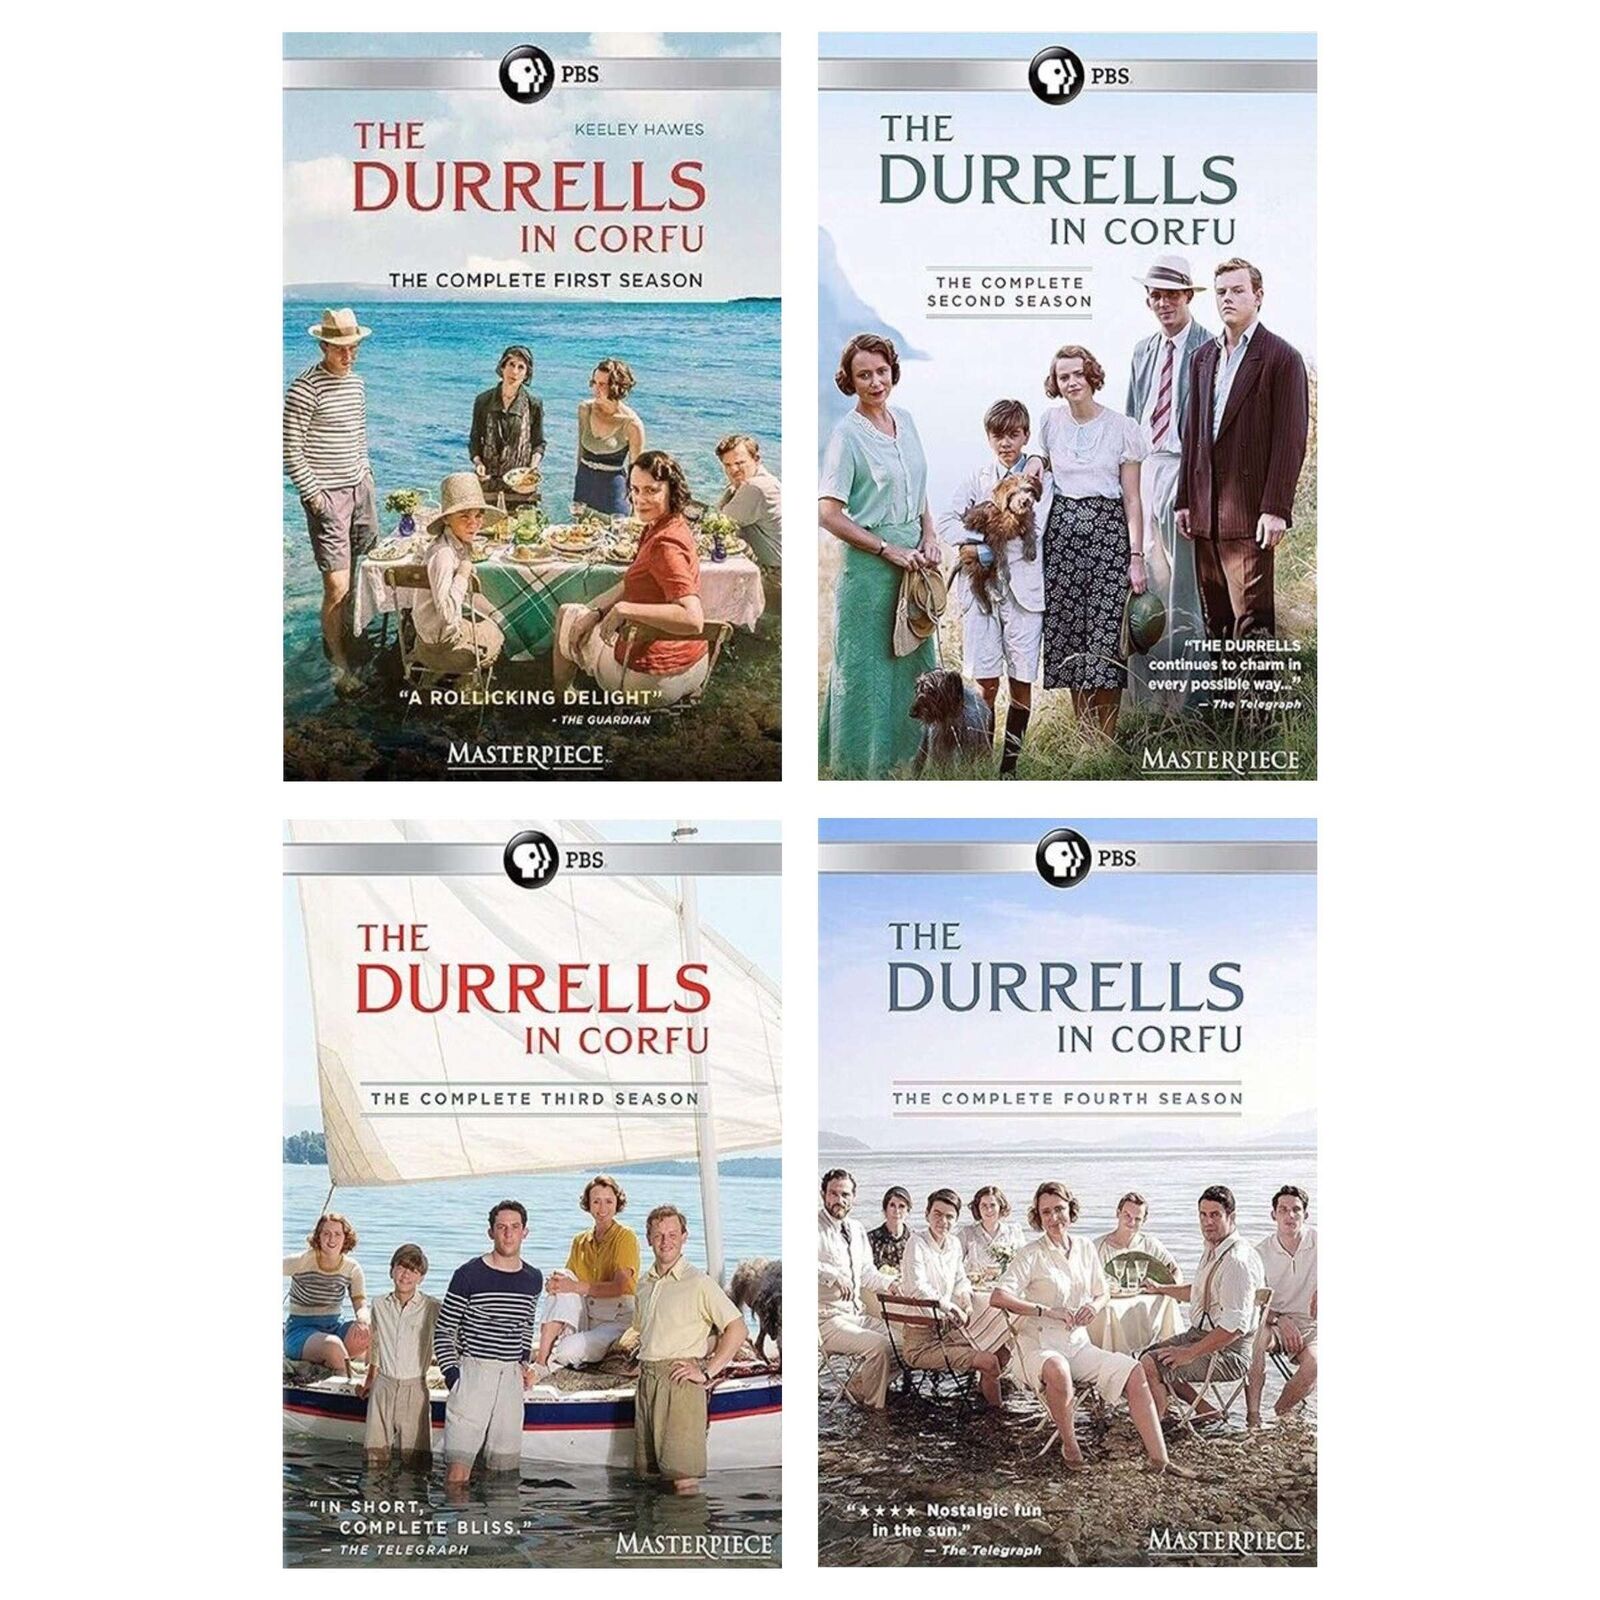 THE DURRELLS IN CORFU: The Complete Series Seasons 1-4 - (DVD, 8-Disc Set) NEW